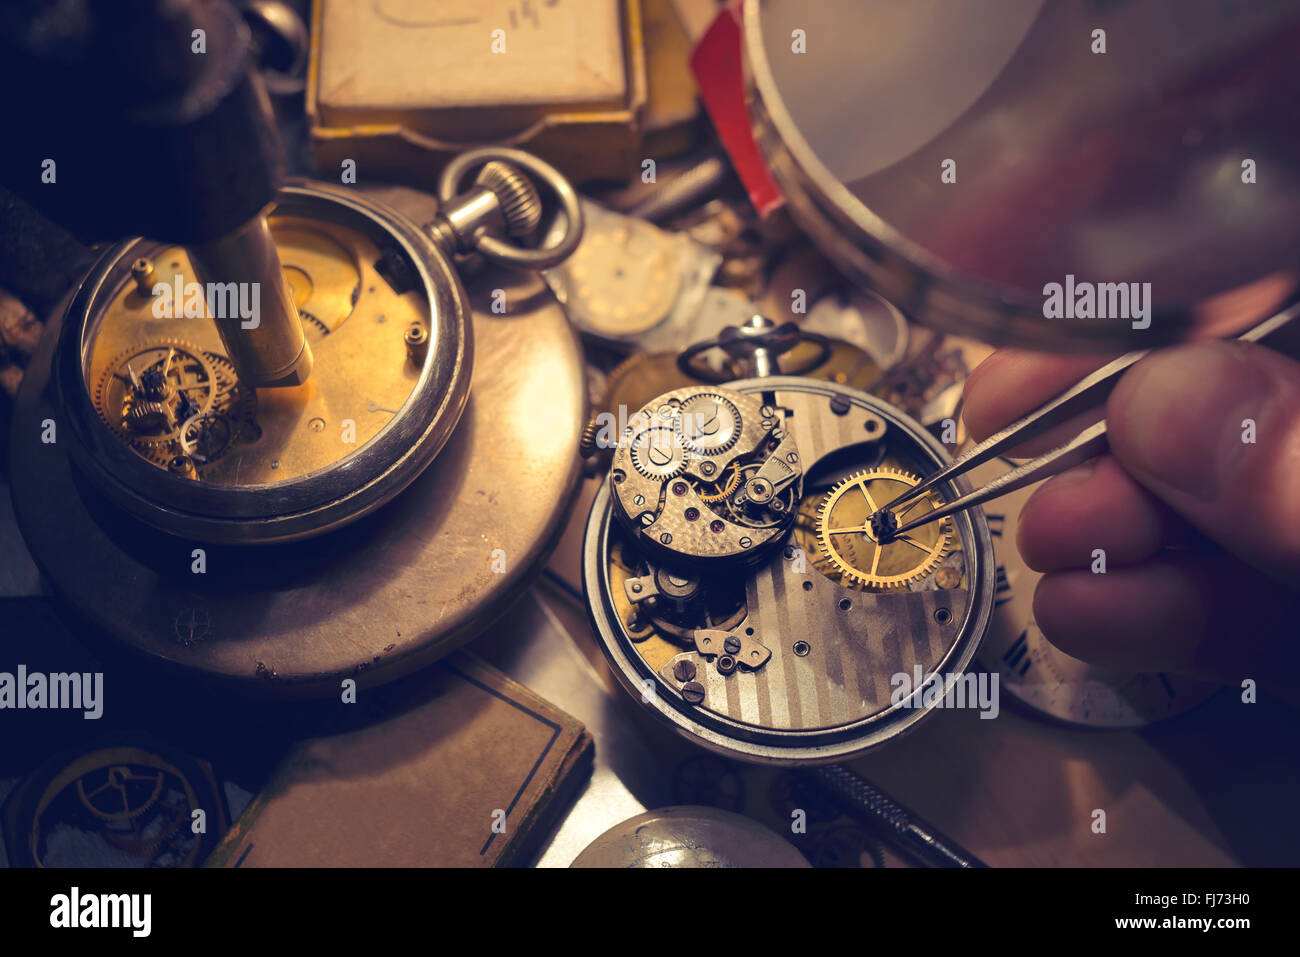 Watchmakers Craftmanship. A watch maker repairing a vintage automatic watch. Stock Photo